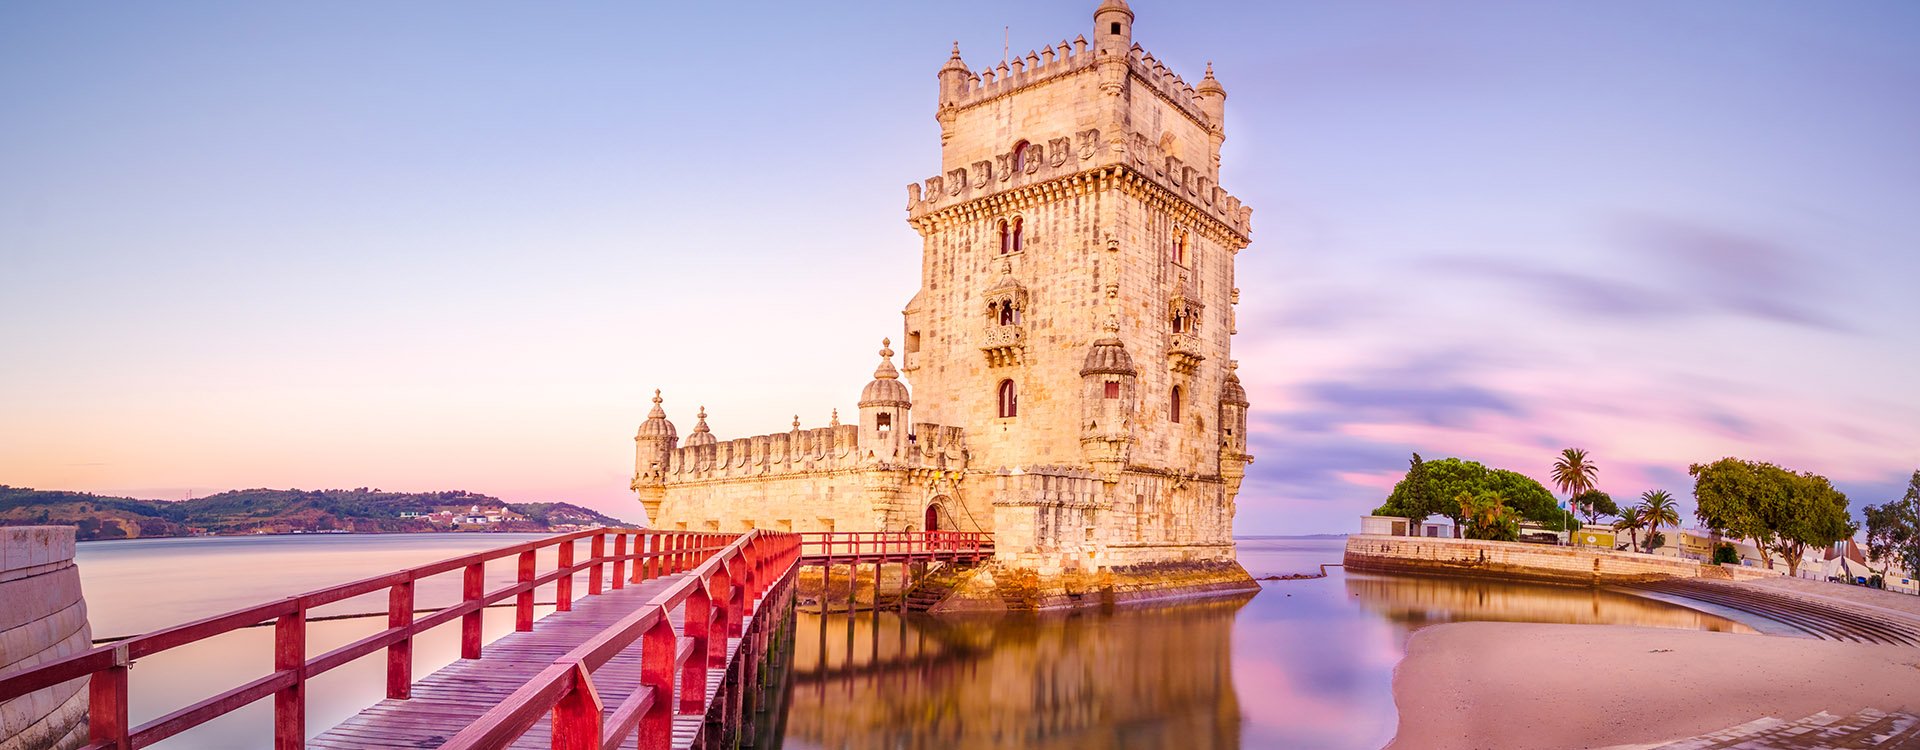 The Belem Tower (Torre de Belem), Lisbon, Portugal. At the margins of the Tejo river, it is an iconic site of the city. Originally built as a defence tower, today it is used as a museum